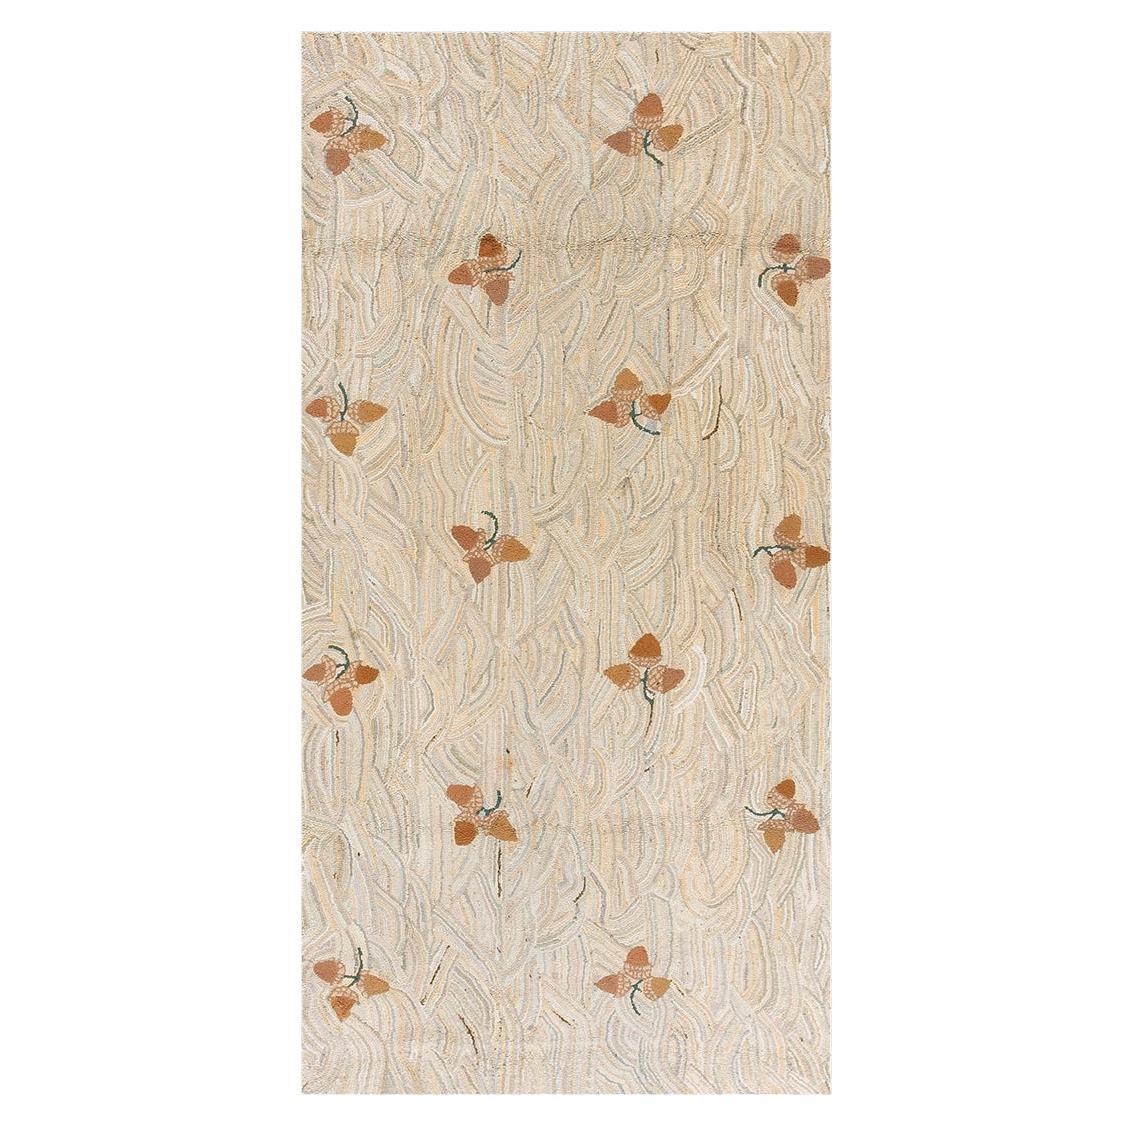  Mid 20th Century American Hooked Rug ( 4" x 8' - 122 x 244 )